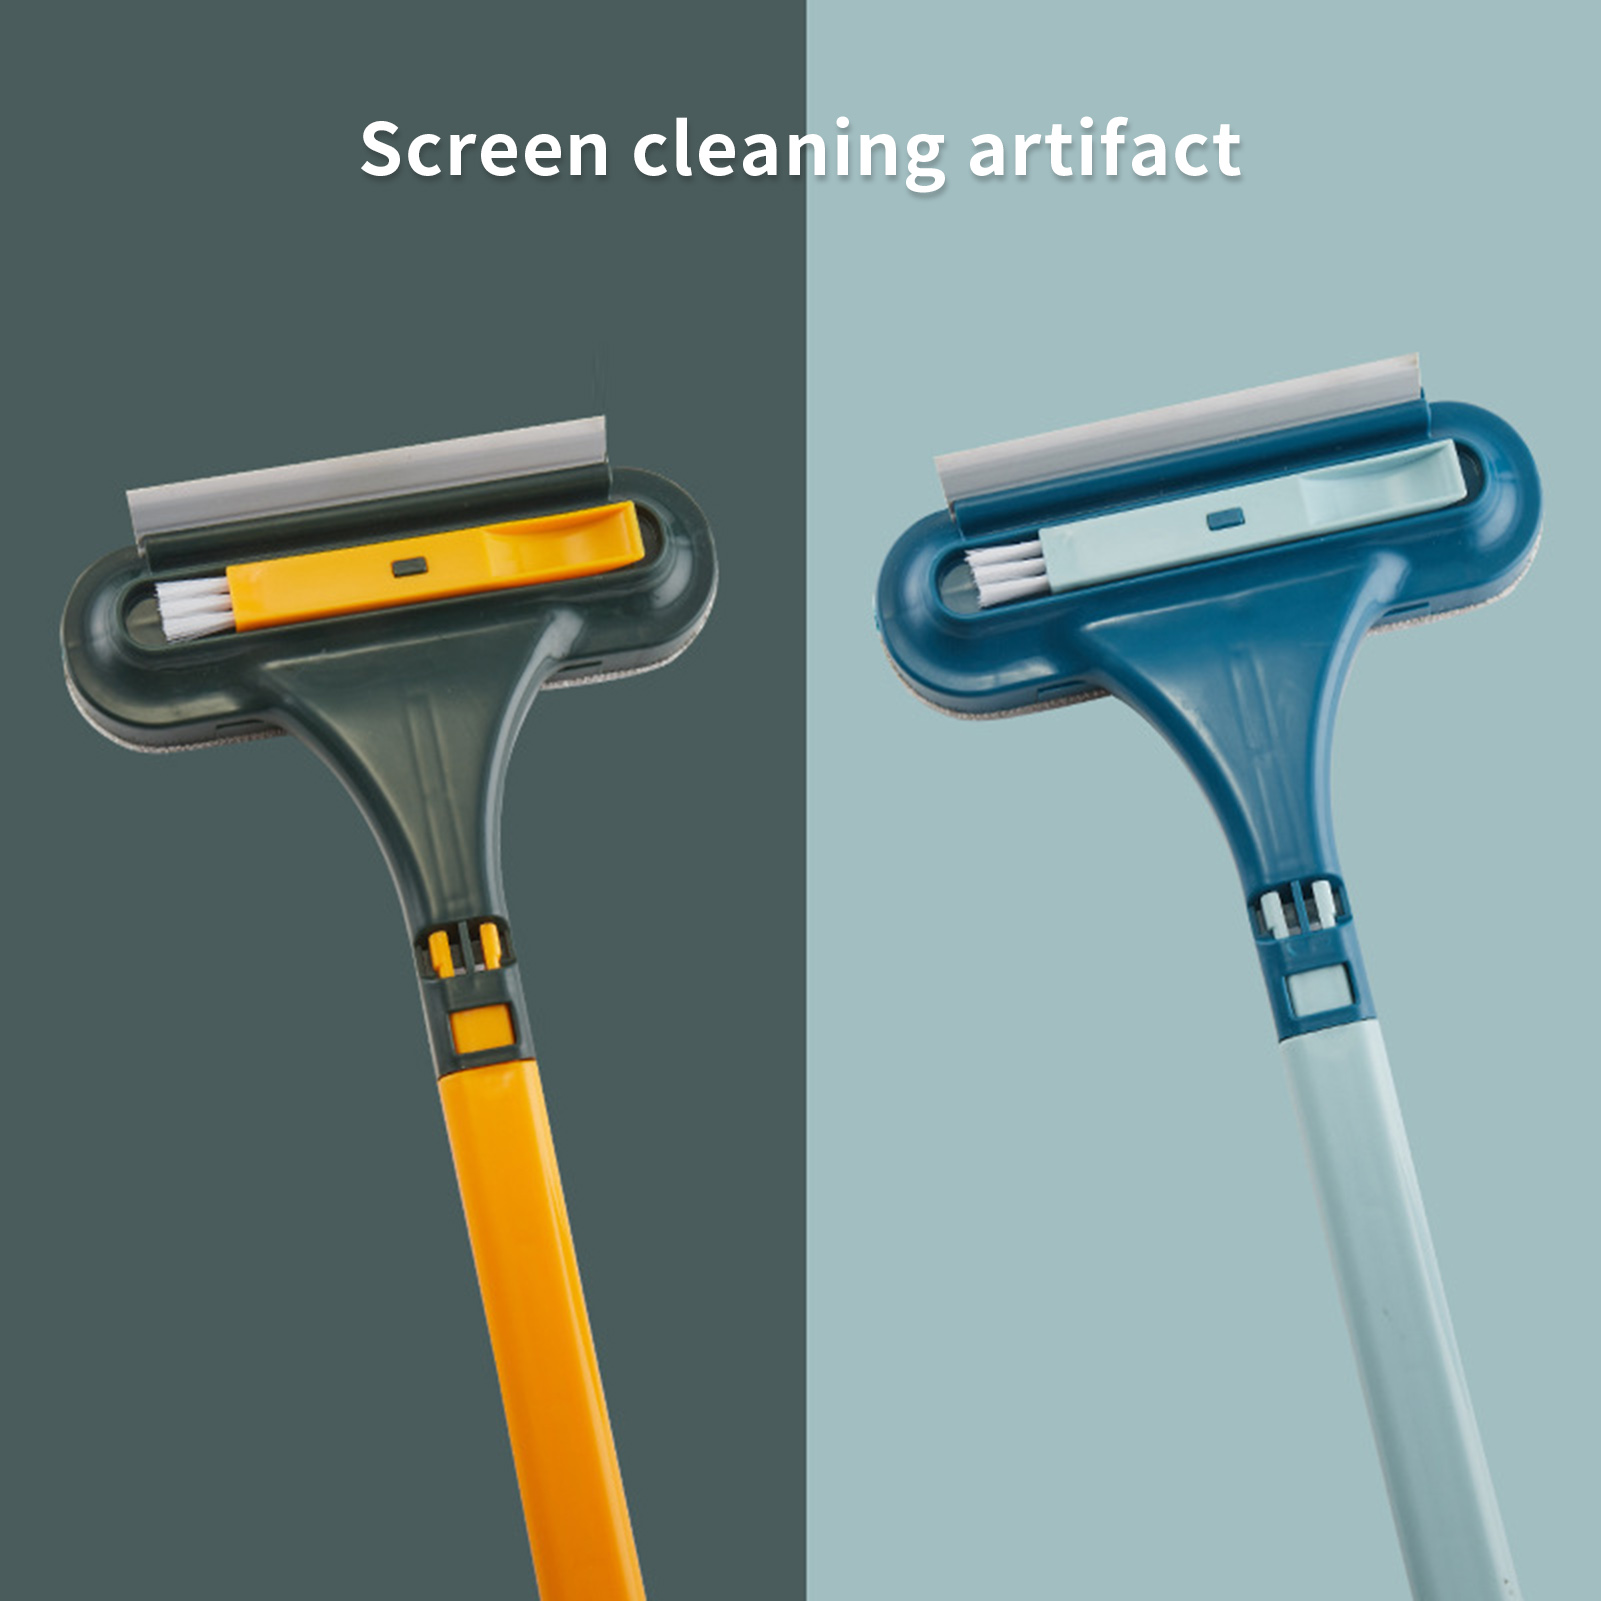 Hesroicy Cleaning Brush Convenient Multifunctional Wide Application  Versatile Washable Decontamination Extend Double-sided Glass Cleaner  Cleaning Tools 